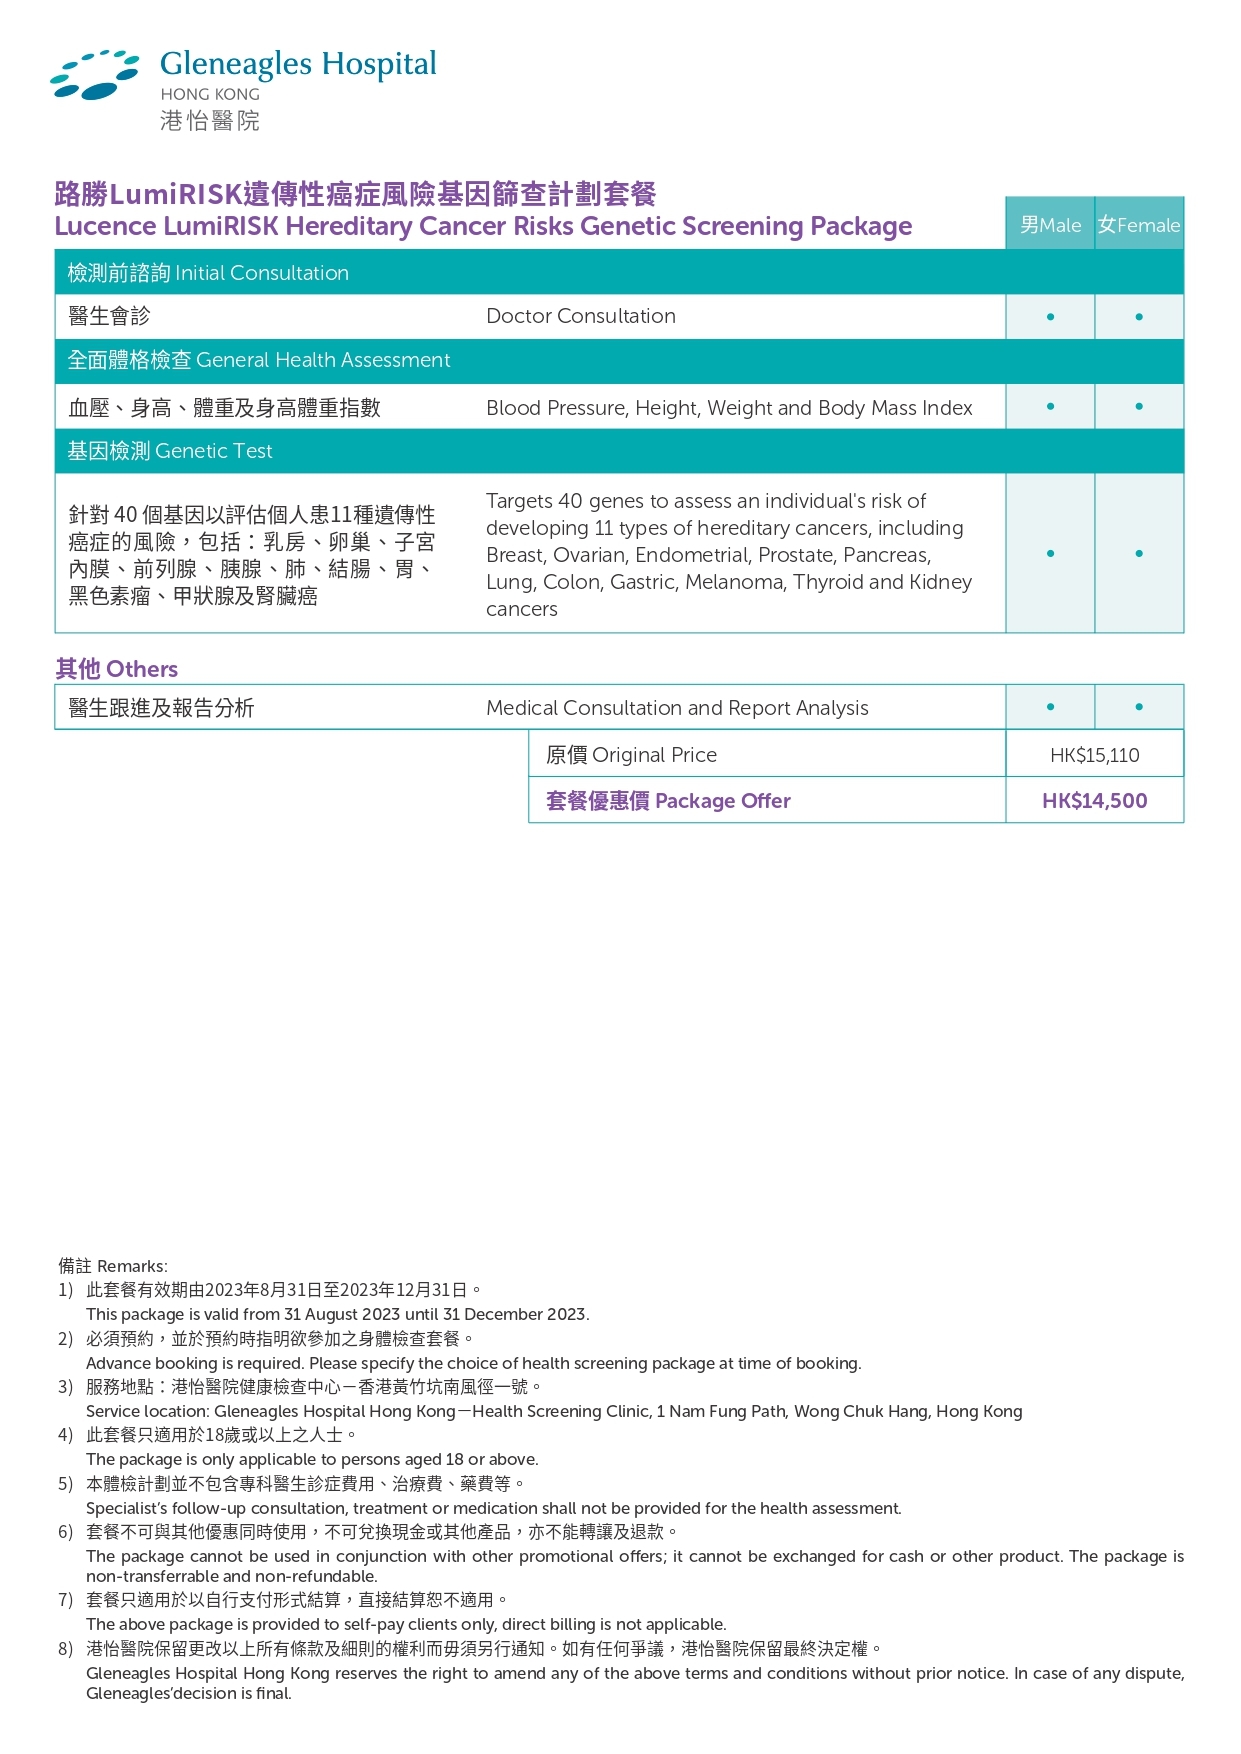 GHK-Lucence-LumiRISK-Hereditary-Cancer-Risks-Genetic-Screening-Package-Leaflets_page-0001.jpg#asset:267735